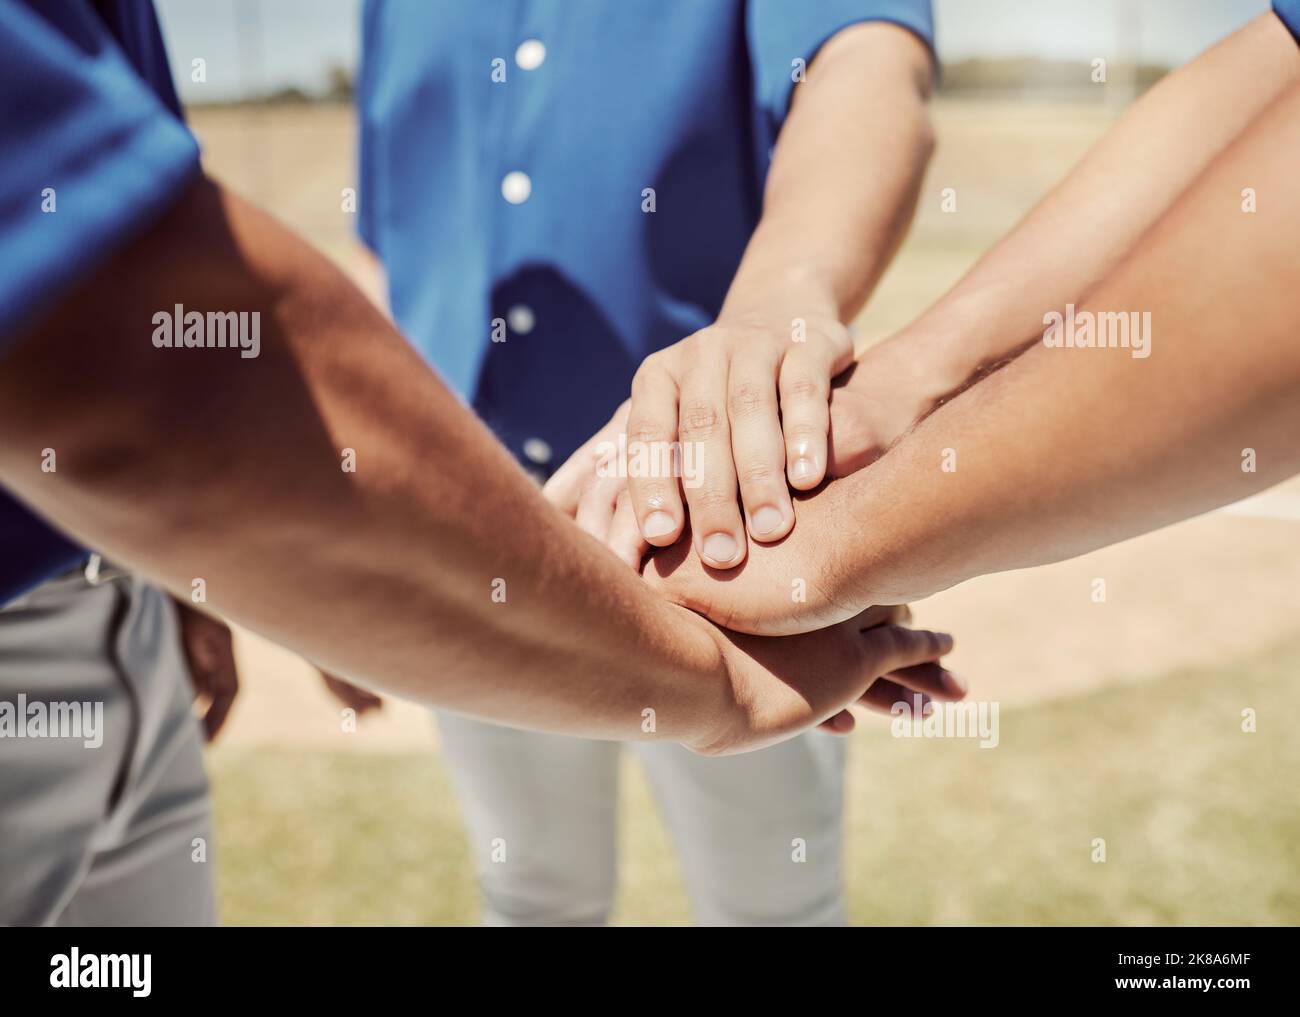 Teamwork, support and hands of baseball player for motivation in sports, goals and winner mindset. Training, community and mission with athlete in Stock Photo